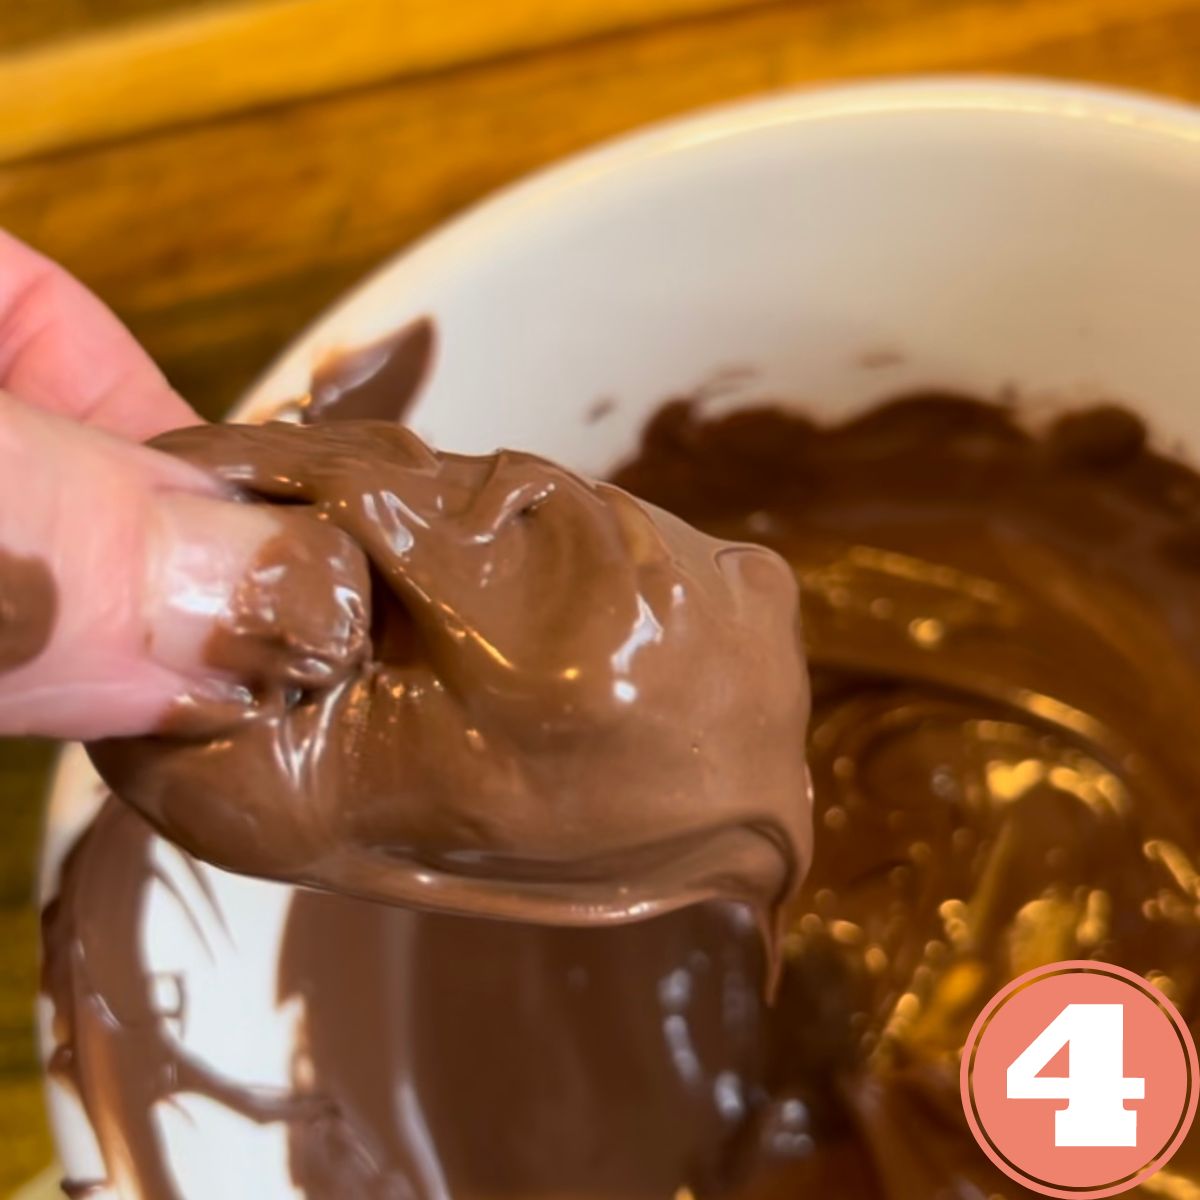 Healthy snicker date dredged in melted chocolate